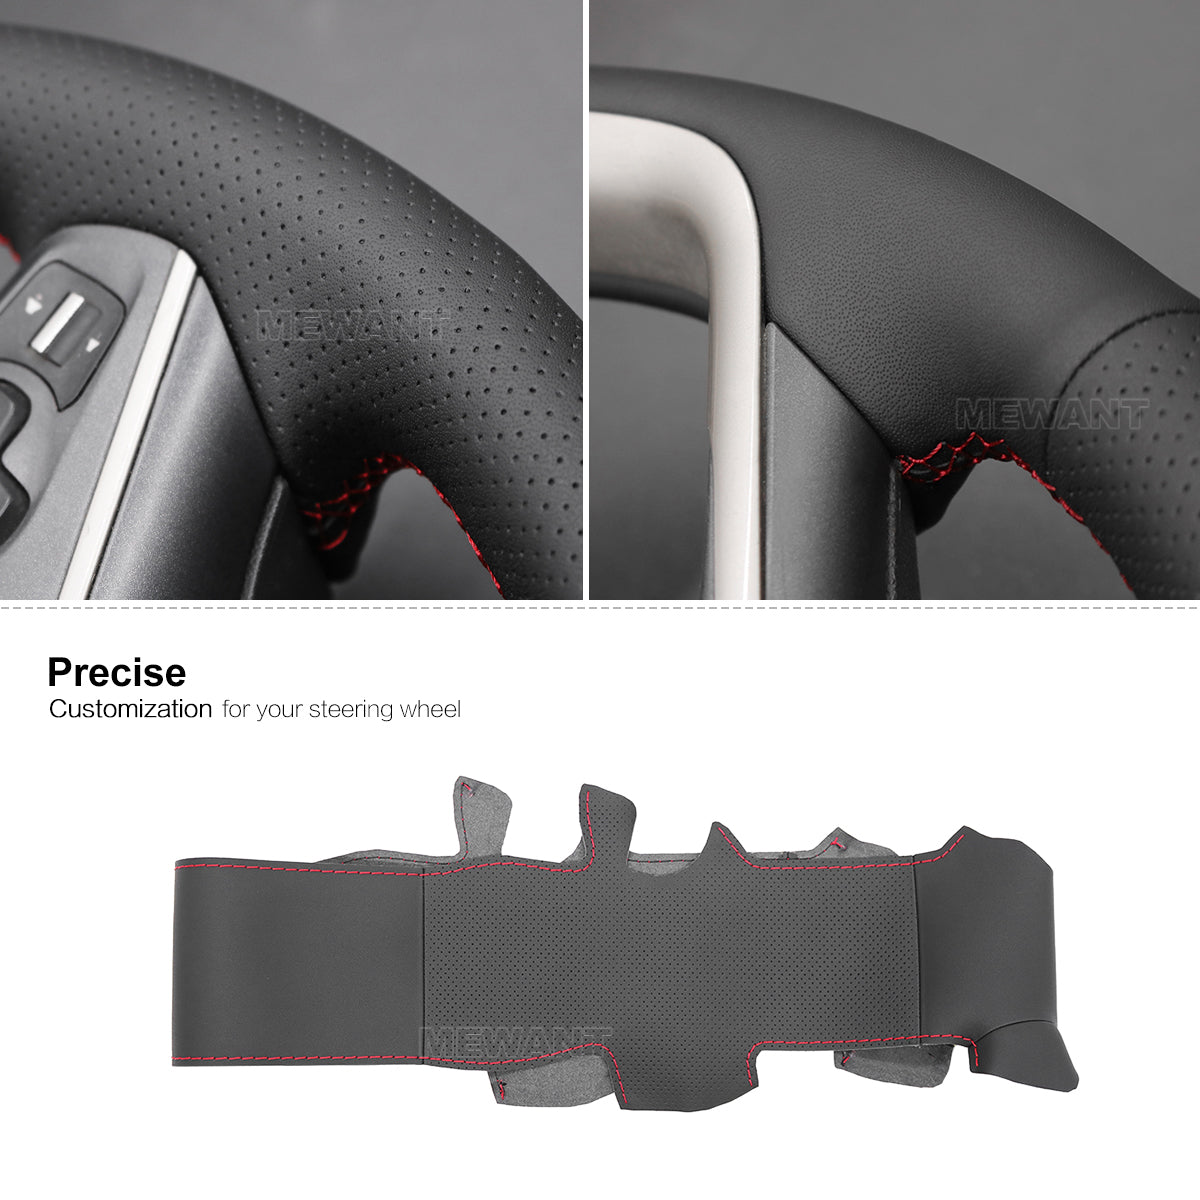 MEWANT Hand Stitch Black Leather Car Steering Wheel Cover for Buick Lacrosse 2010-2013 / Regal 2011-2013 / for Chevrolet Equinox 2010-2016